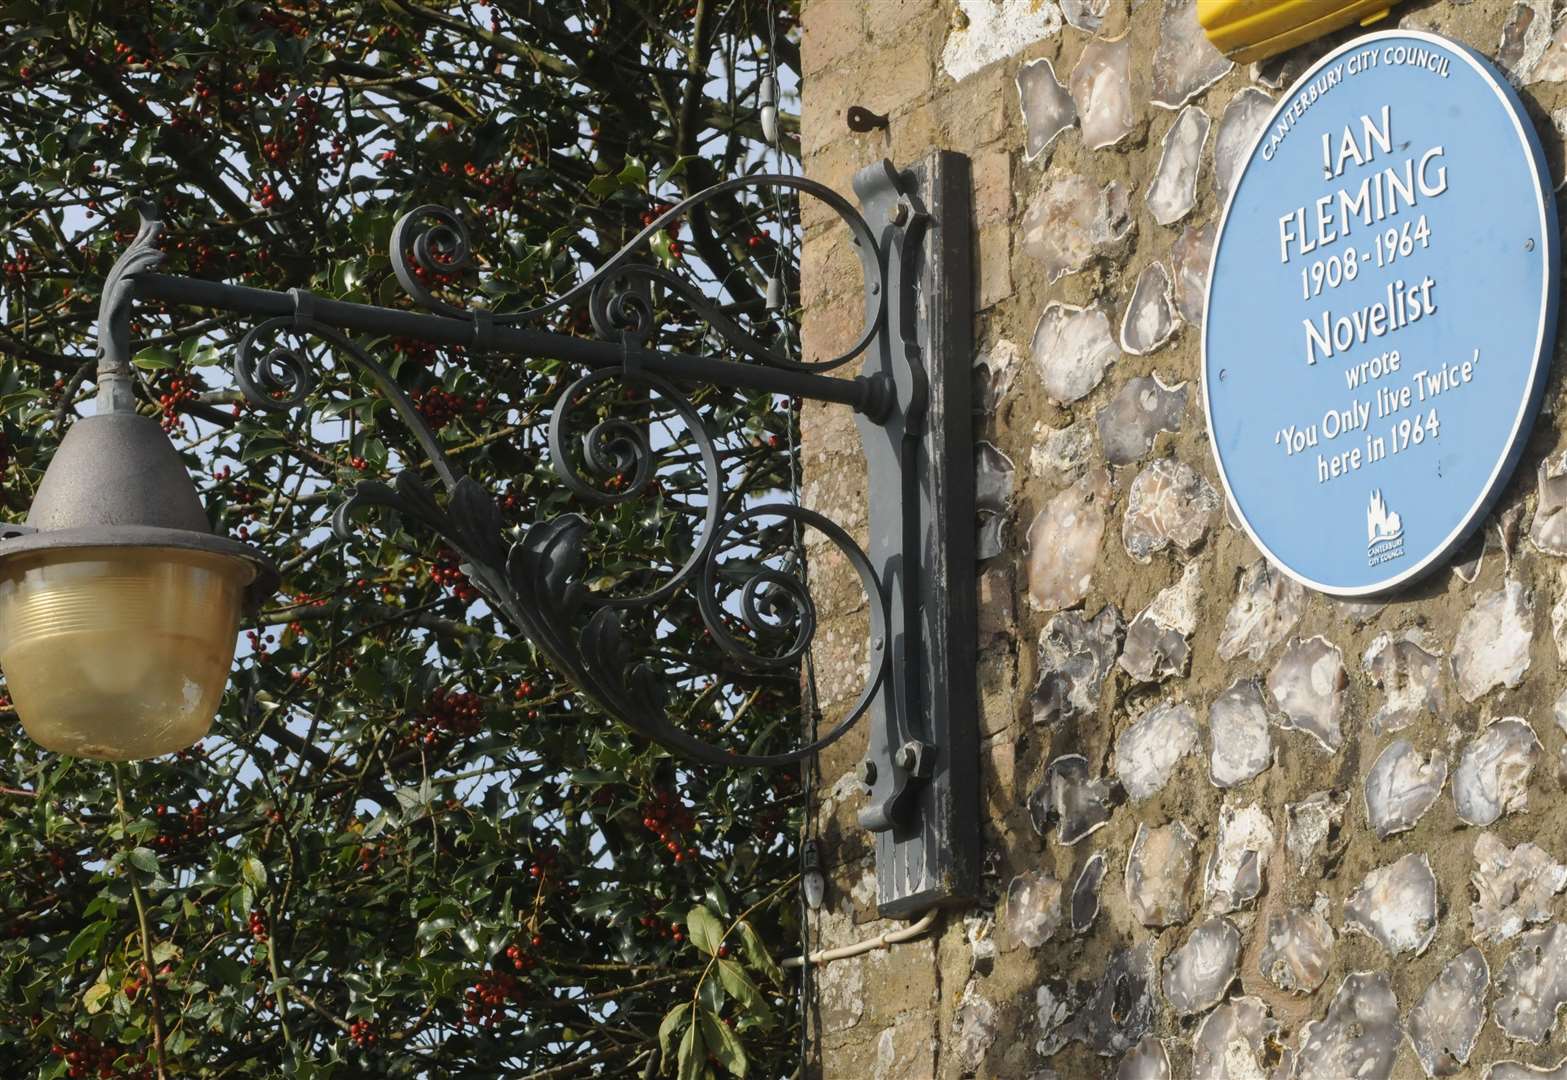 A blue plaque recognising Ian Fleming and his writing at The Duck Inn